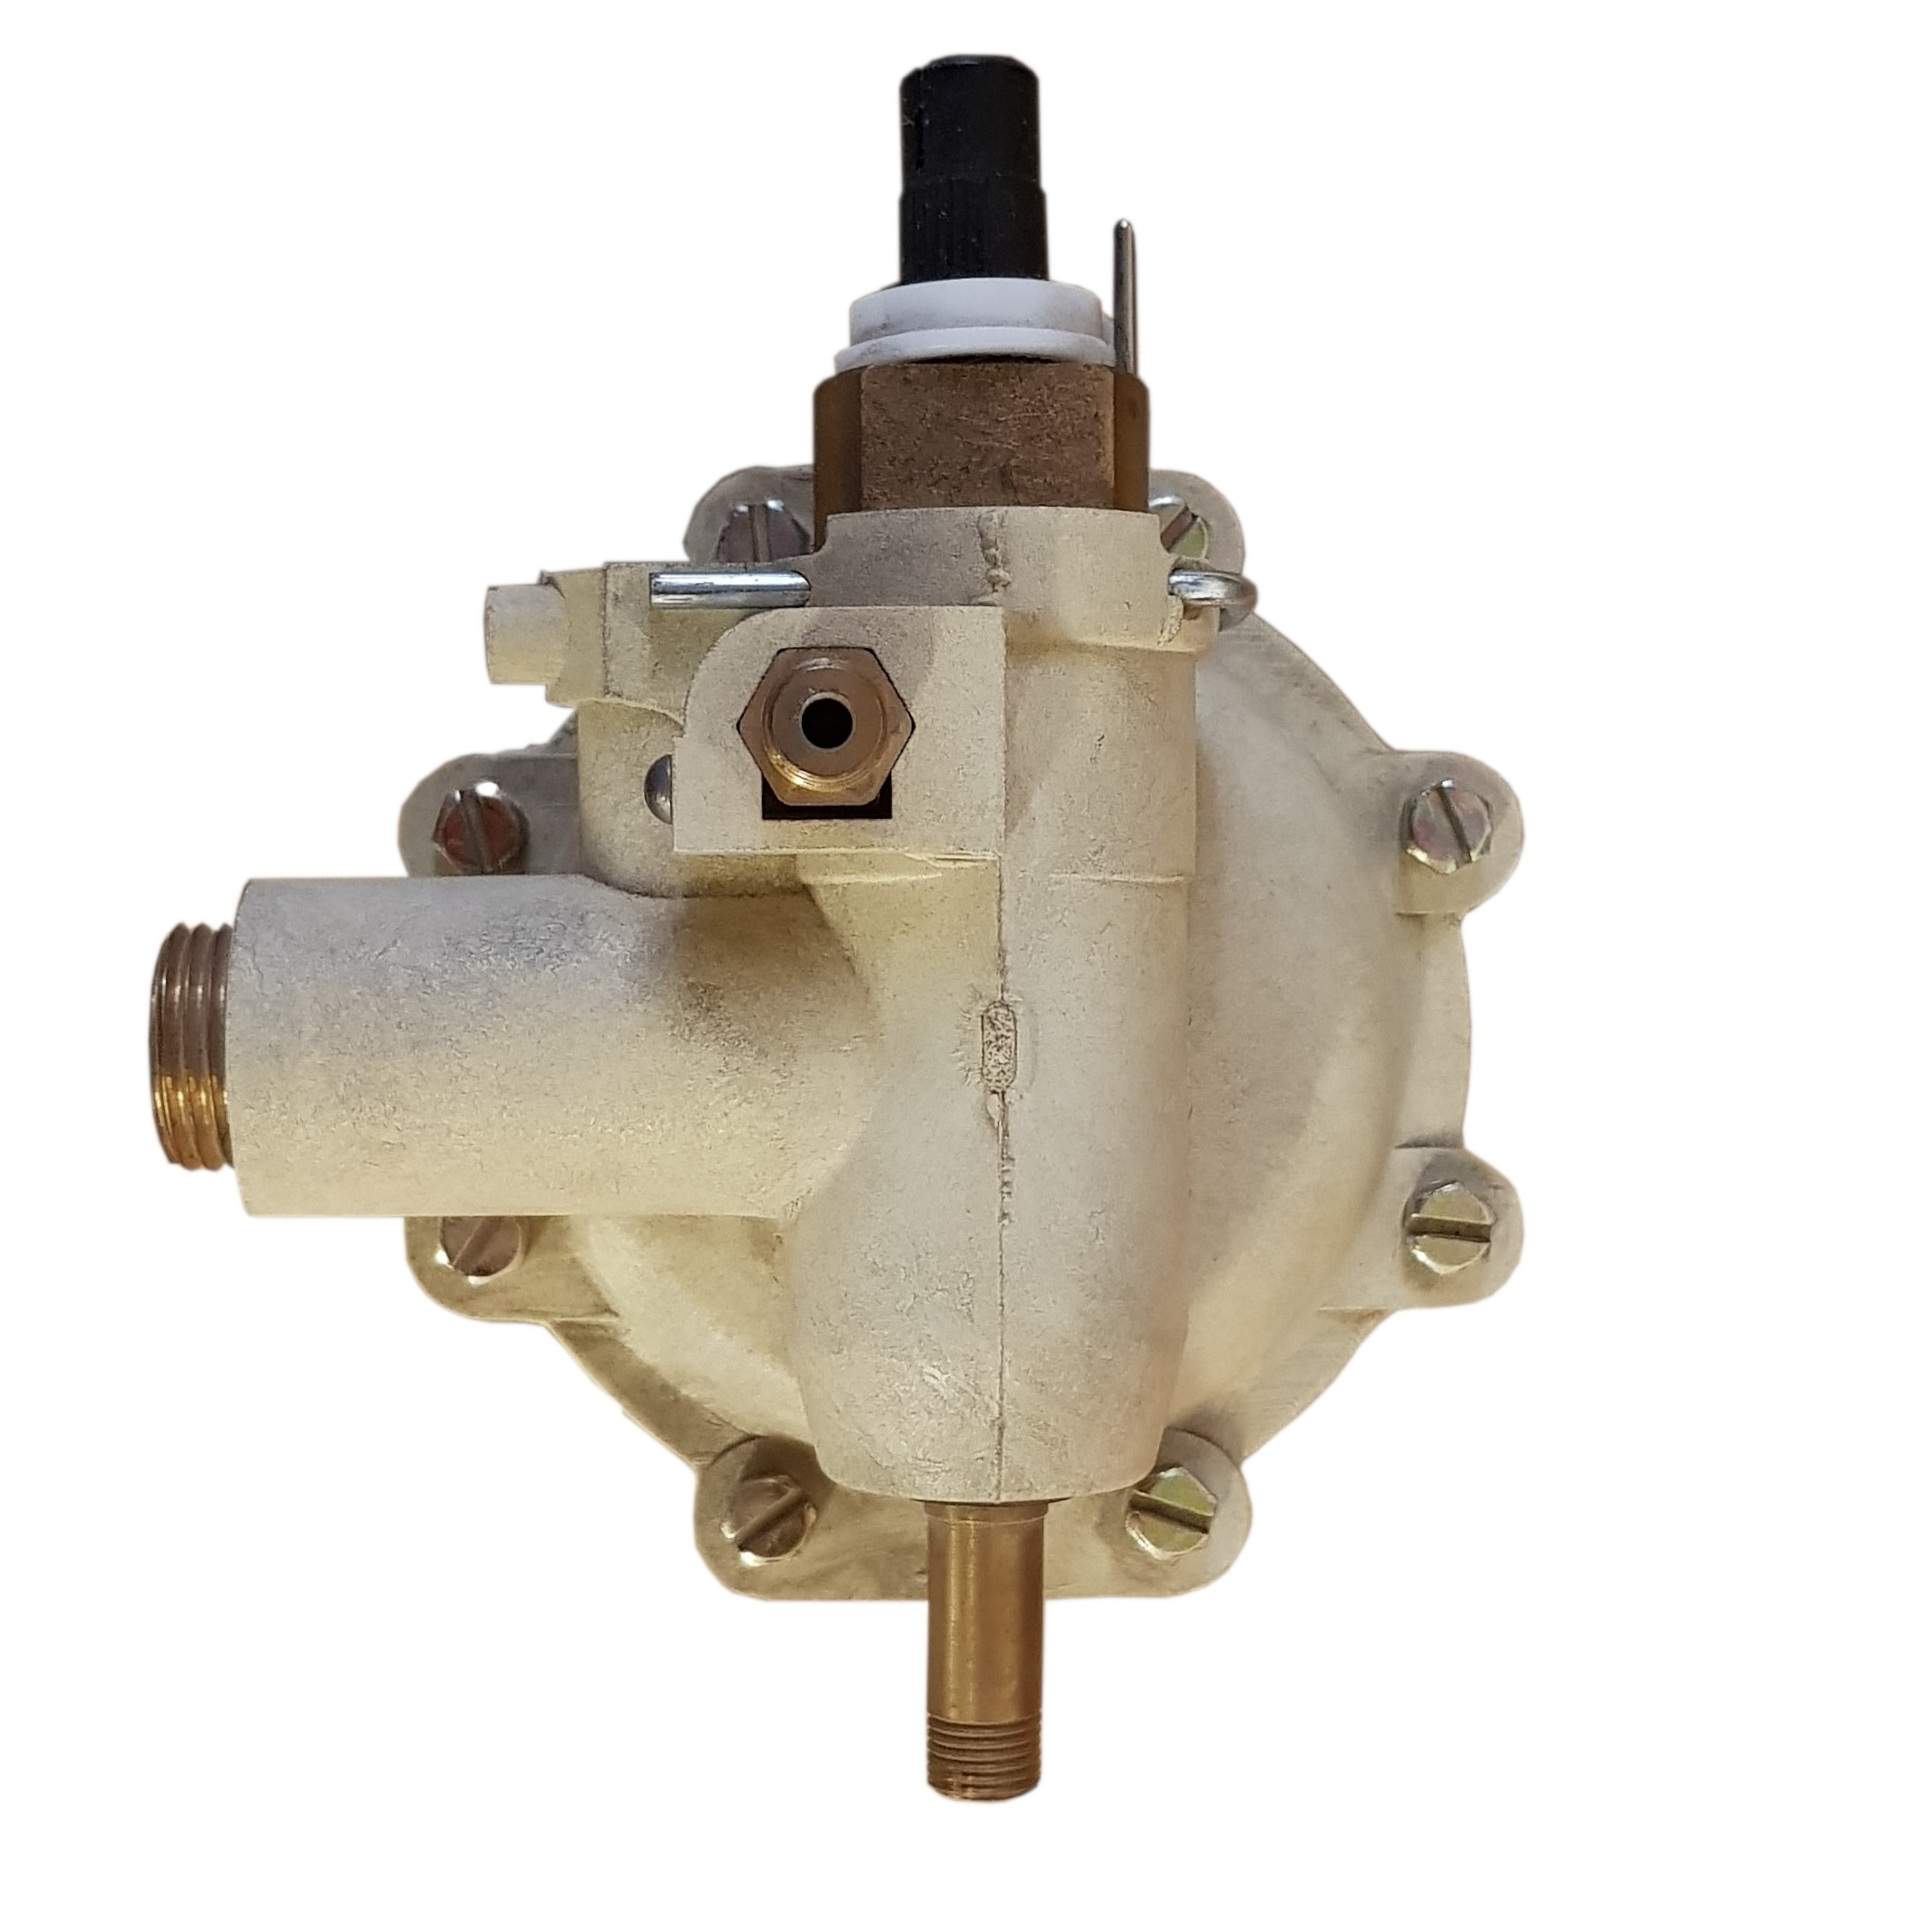 Thermostatic water valve CELTIC mixed not RSC